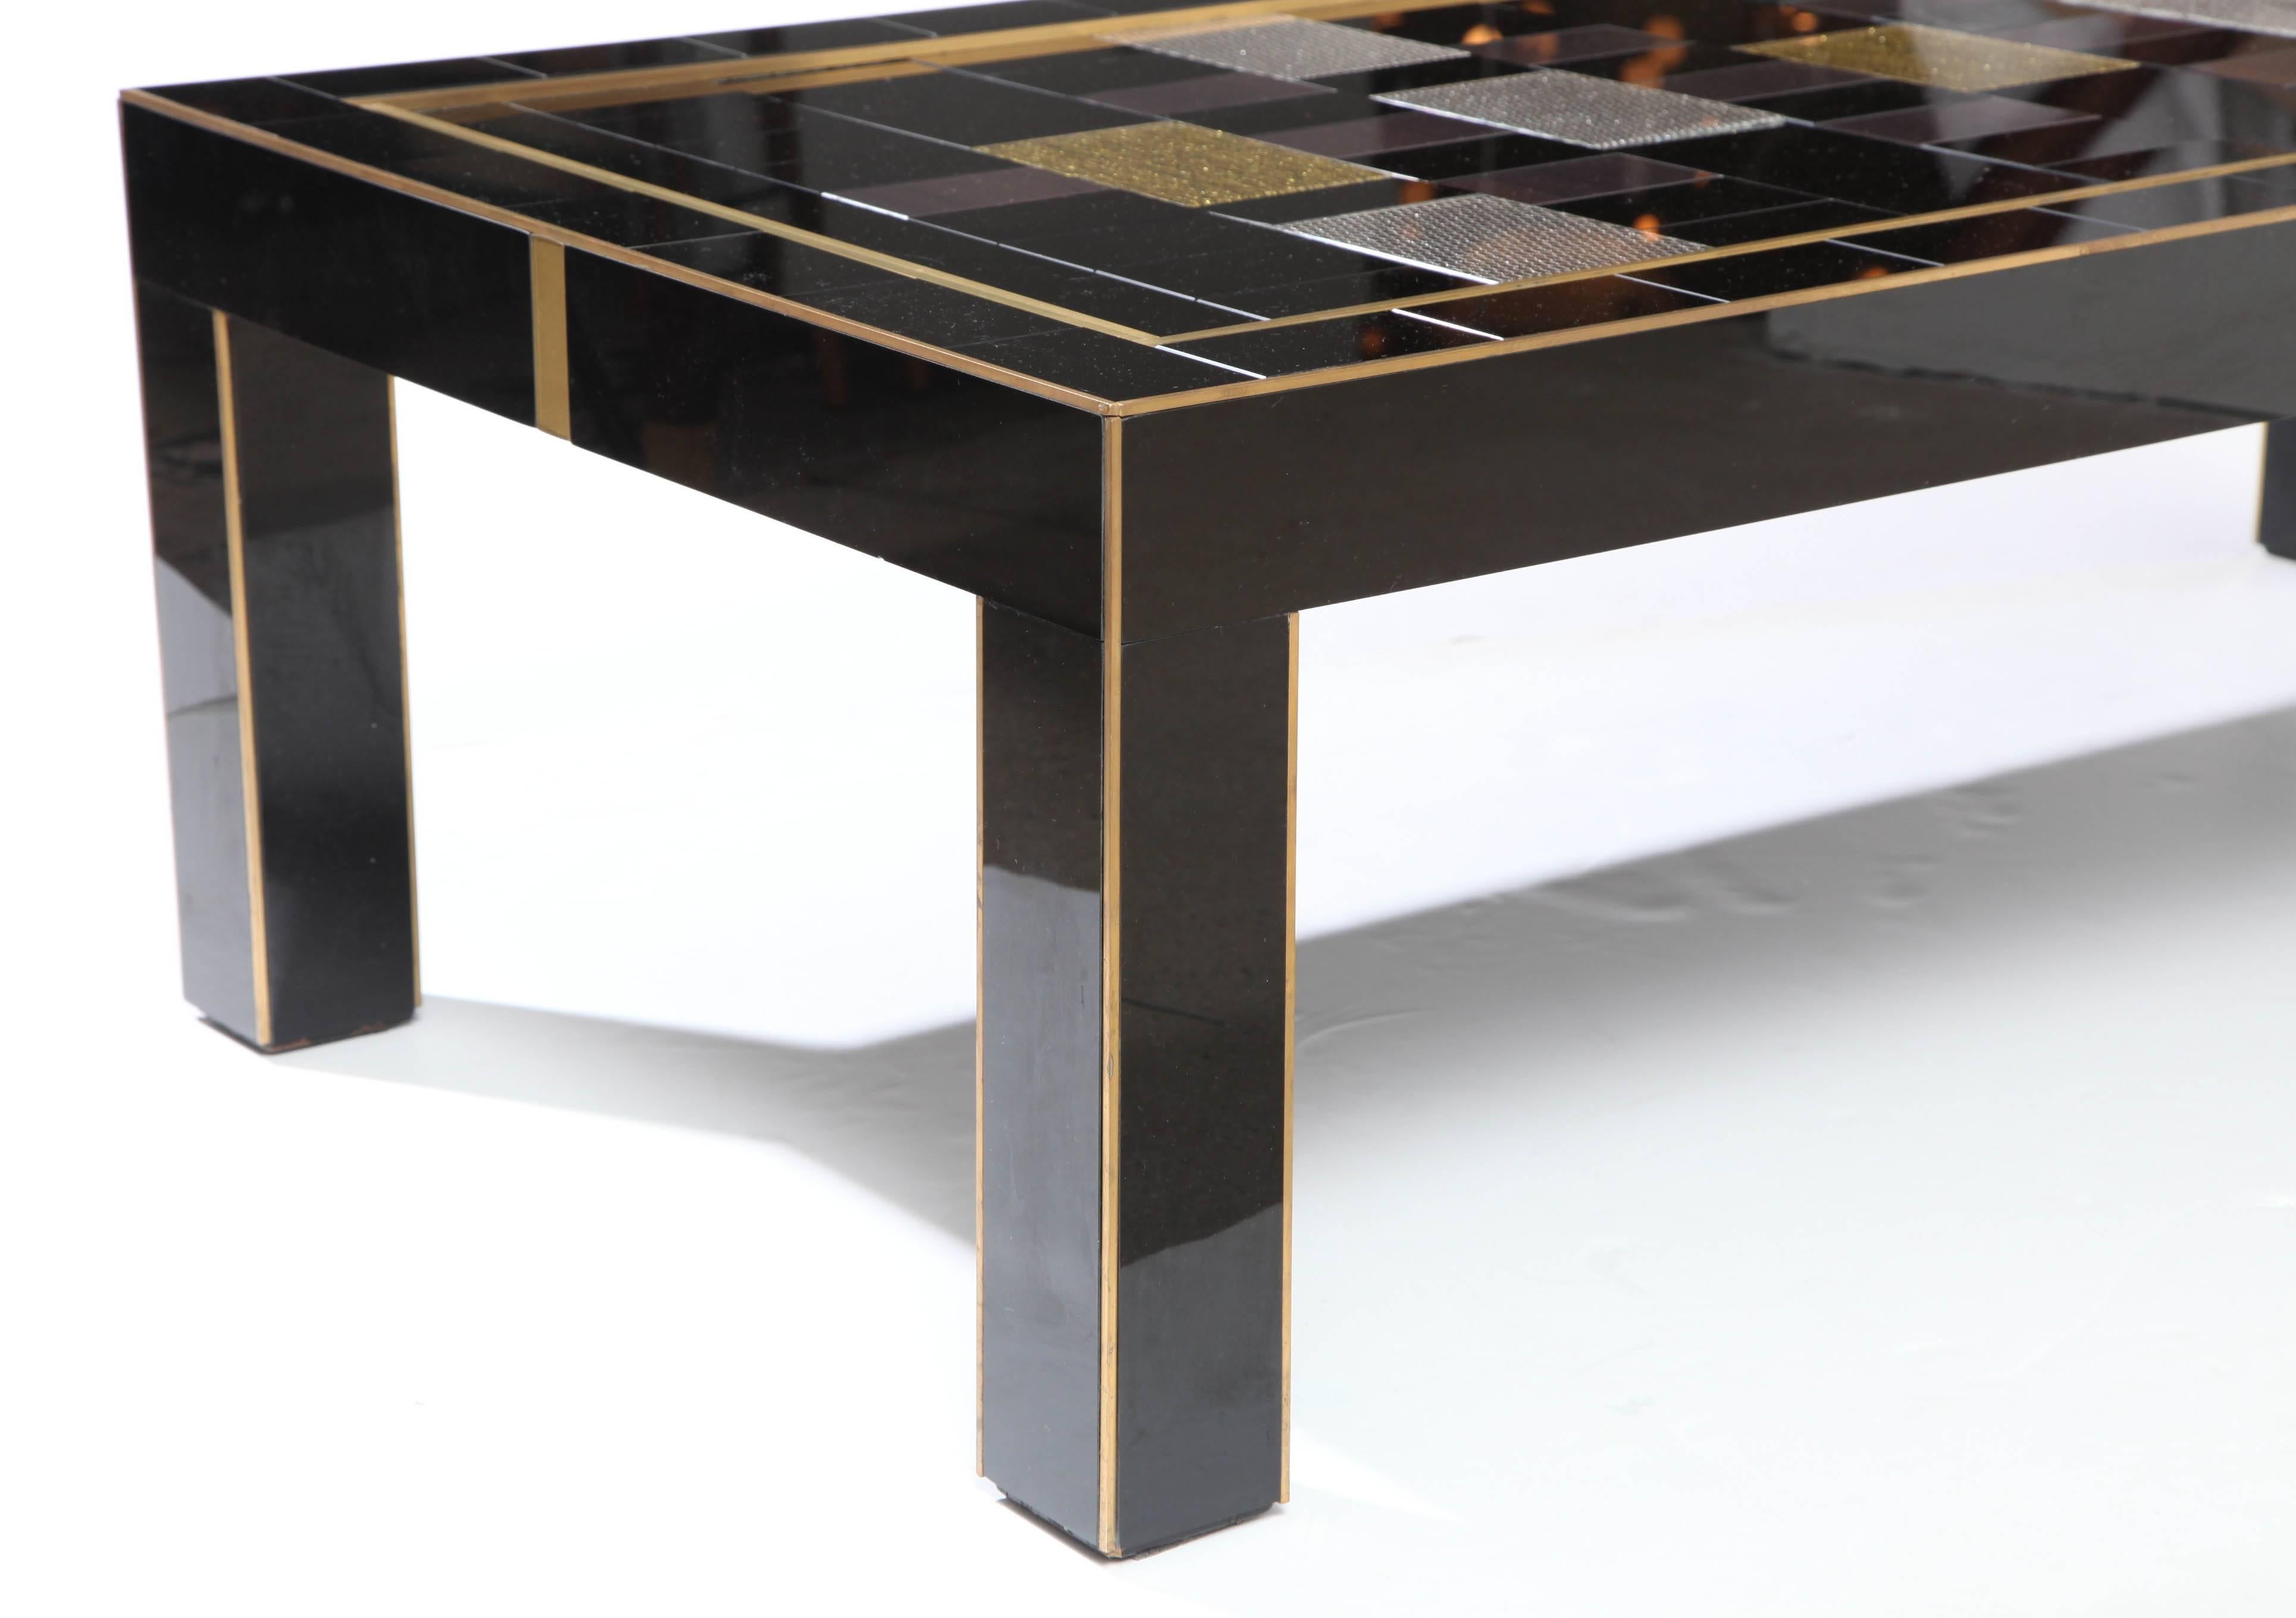 Custom Black, Silver and Gold Tinted Glass Coffee Table with Brass Inlays, Italy For Sale 1